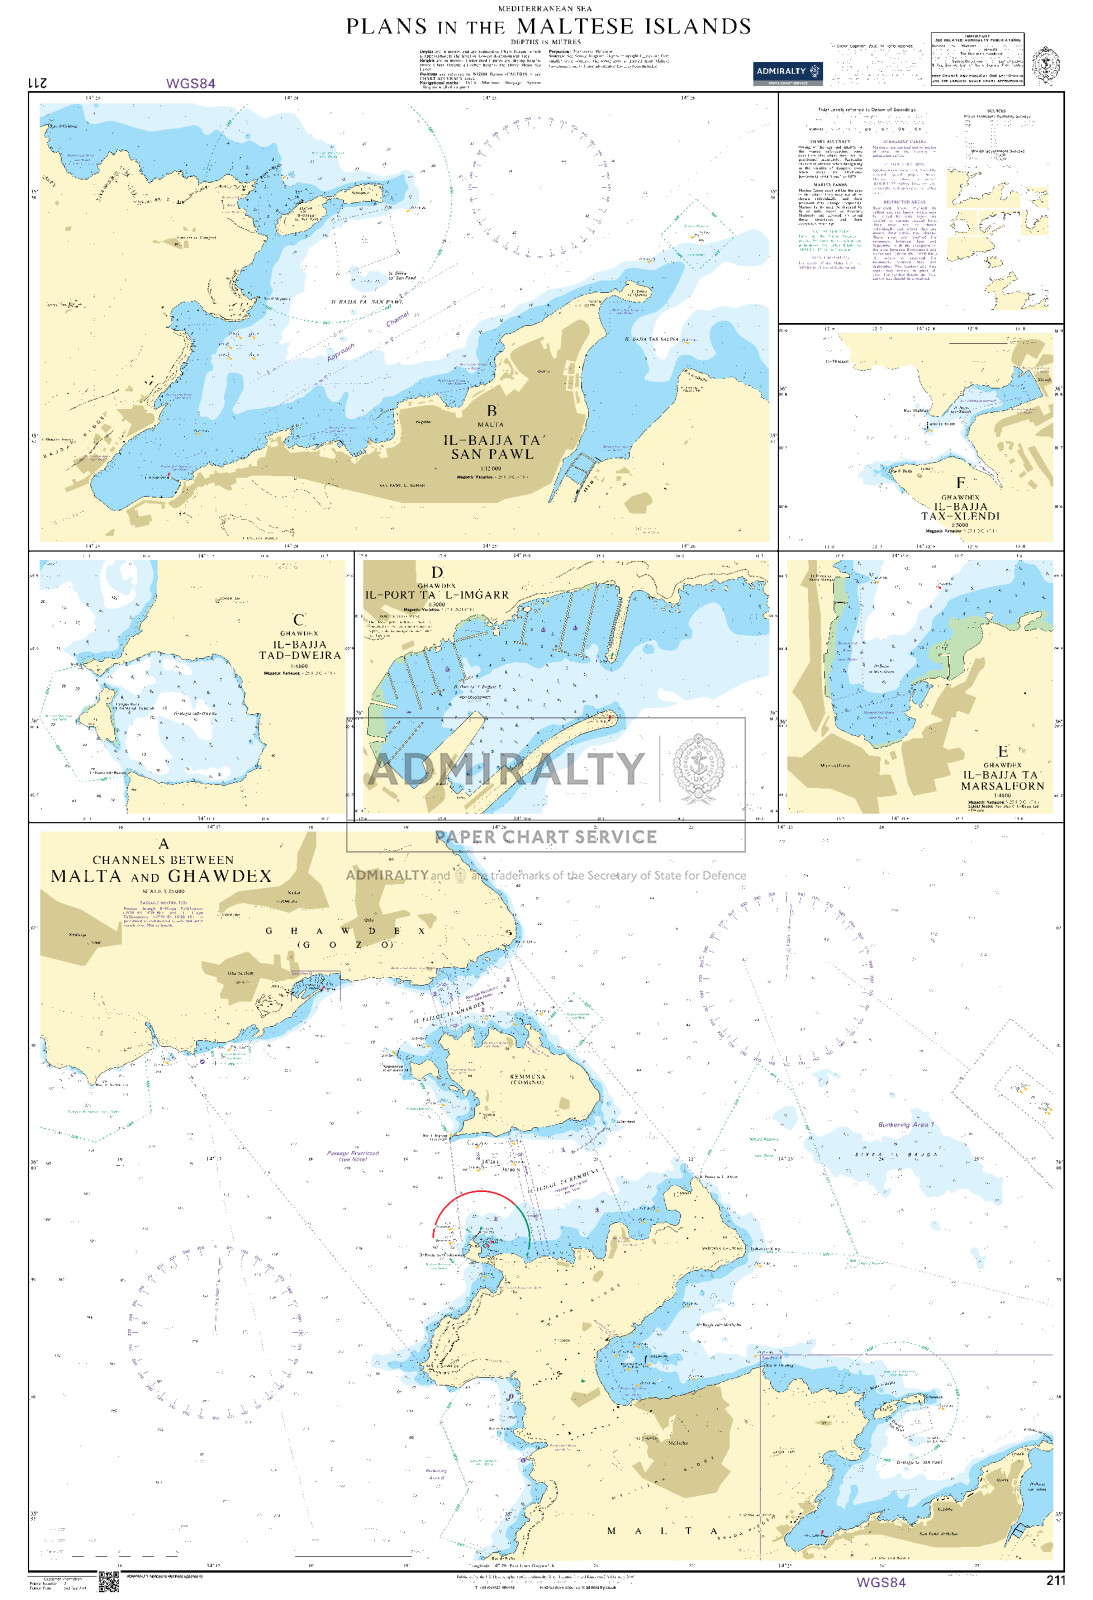 Plans in the Maltese Islands. UKHO211